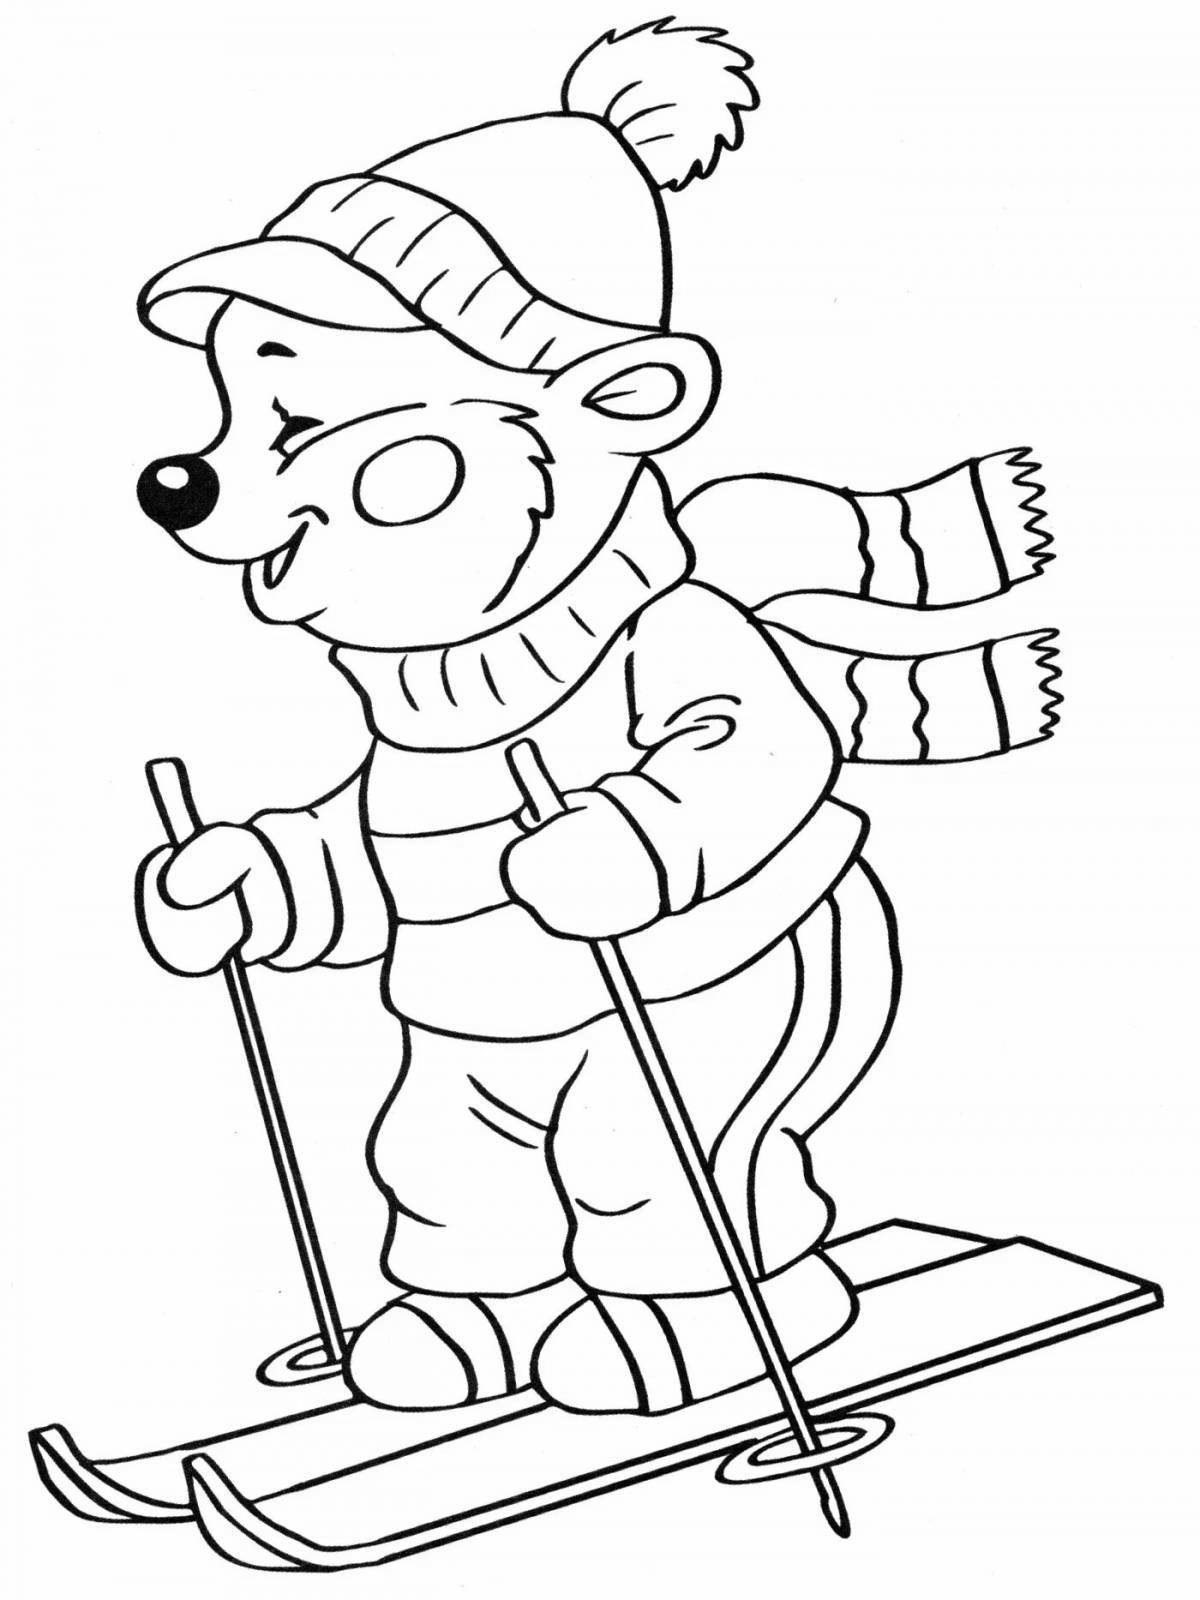 Animated bear on skis coloring book